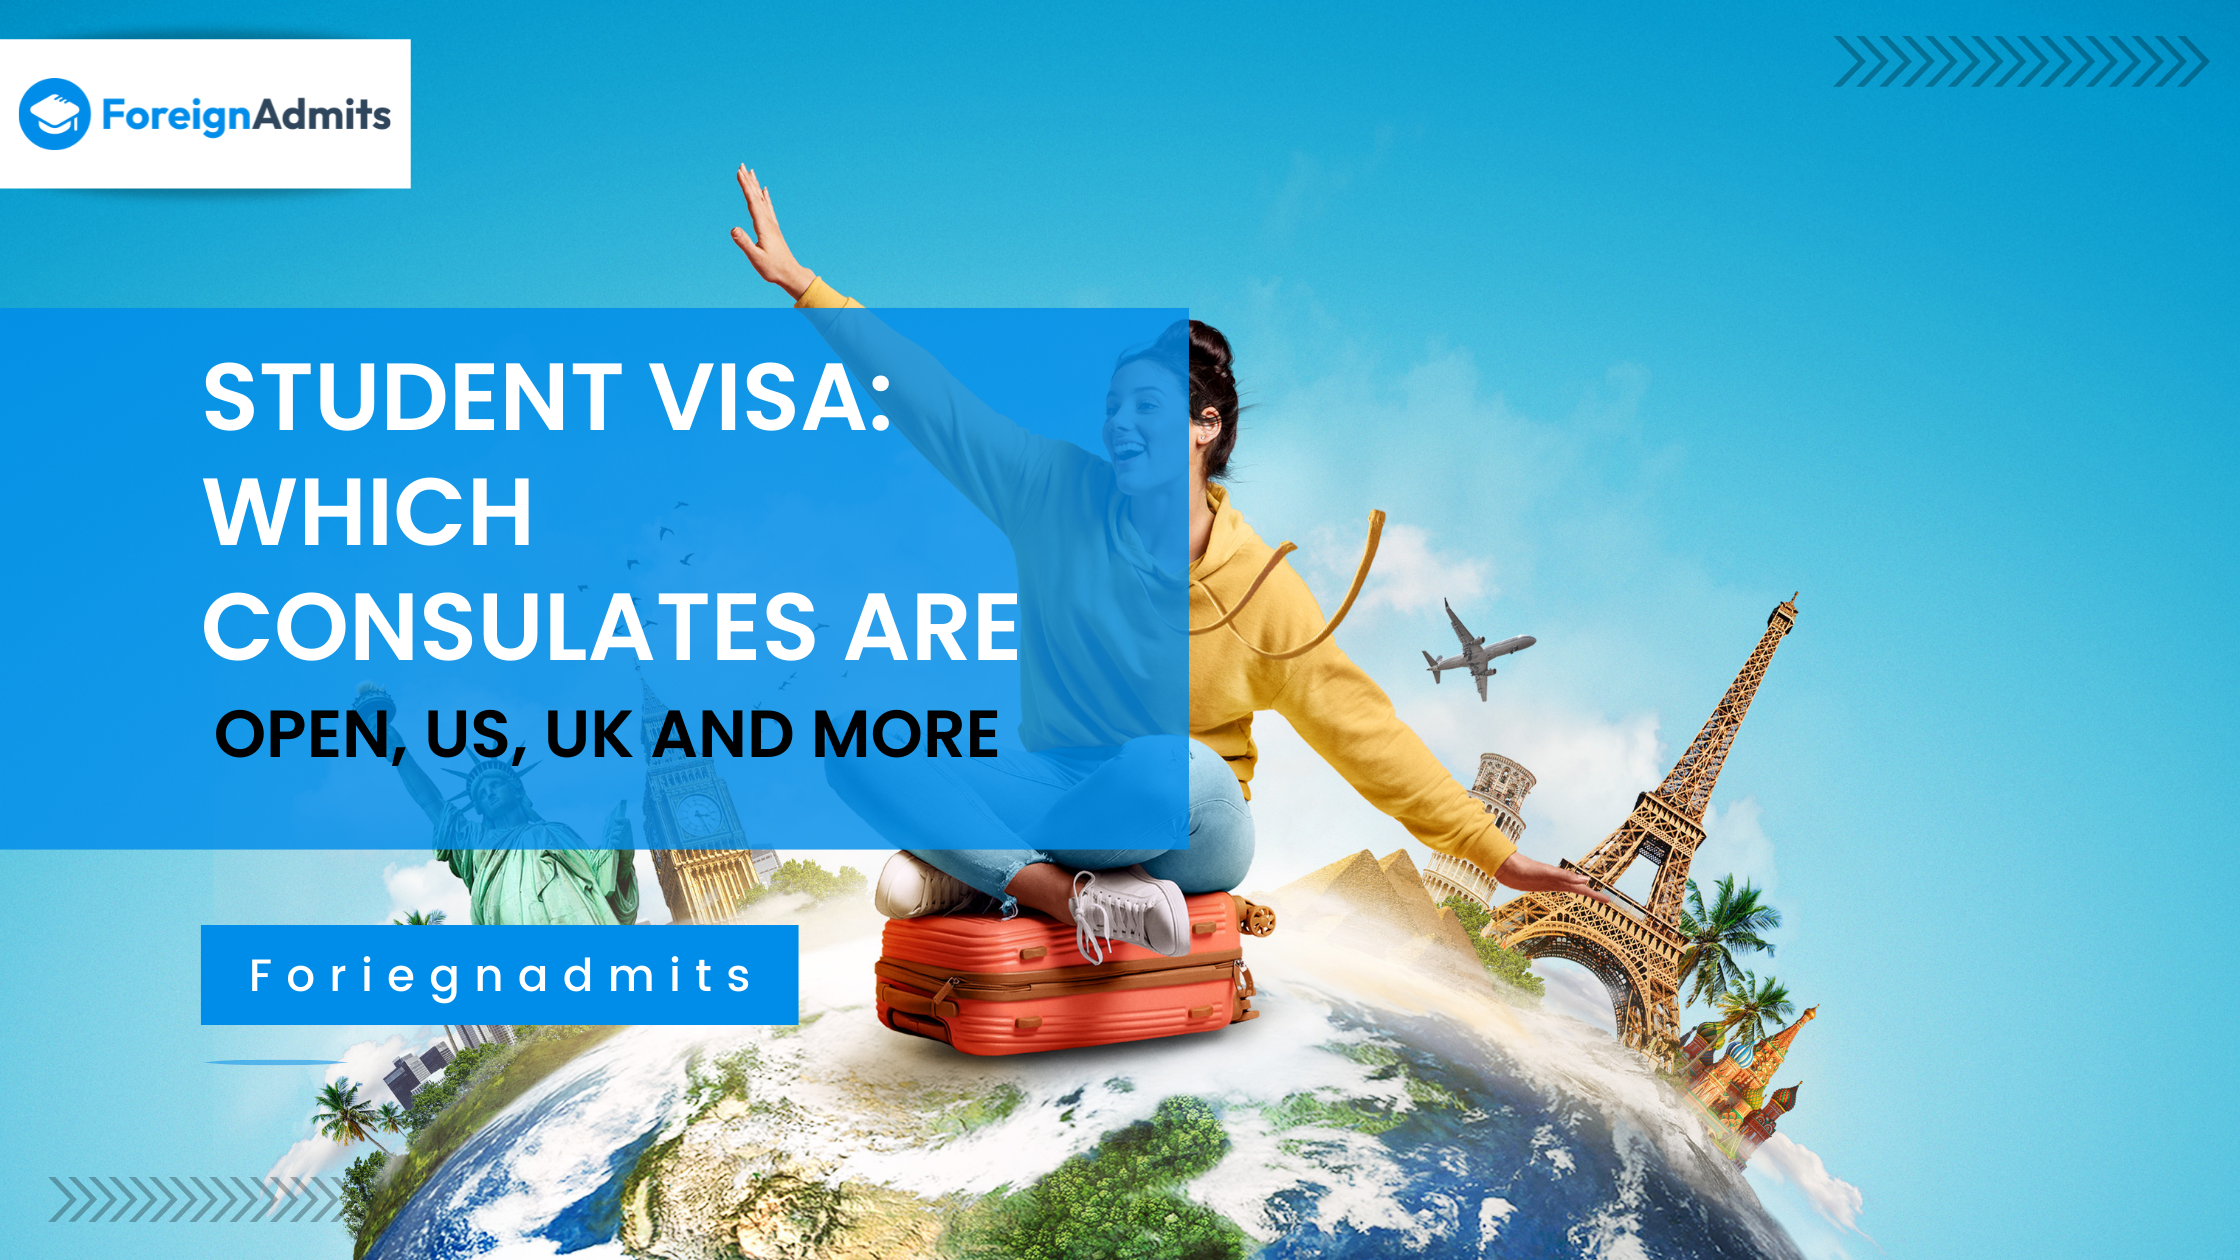 Student Visa: Which Consulates are open, US, UK and more